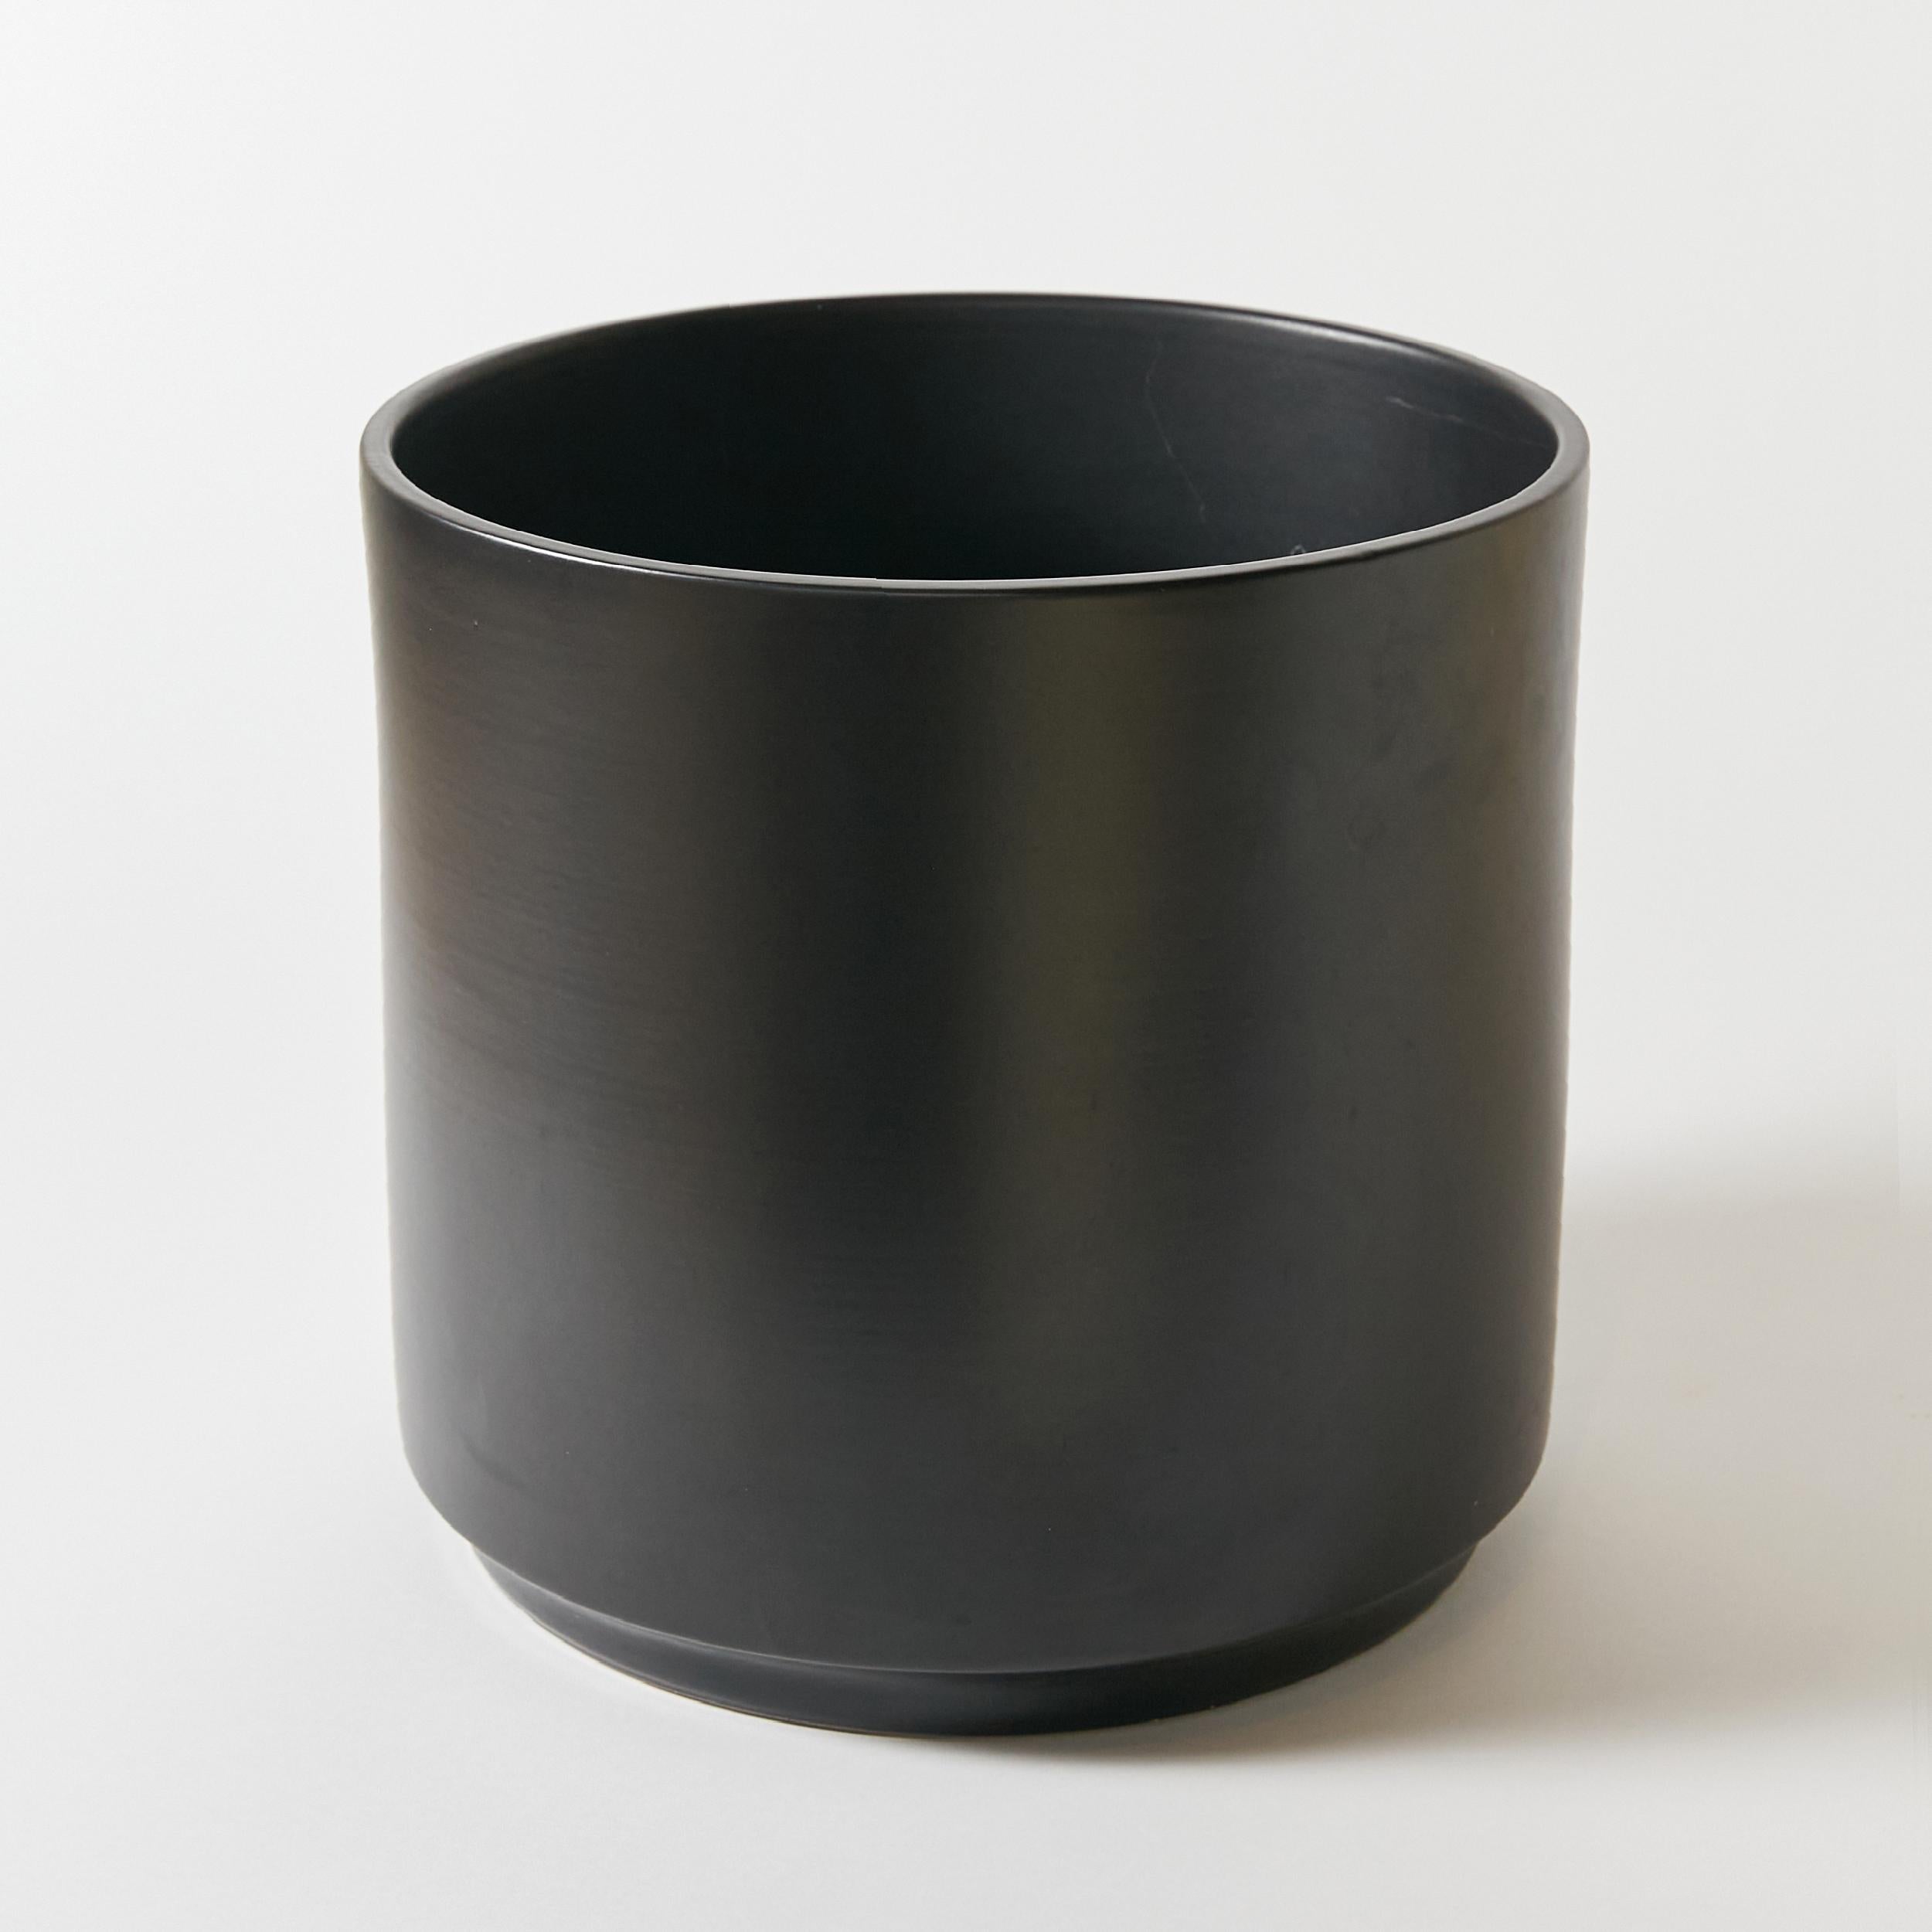 Mid-Century Modern Large Gainey Planter in Satin Black Glaze, California Architectural Pottery For Sale